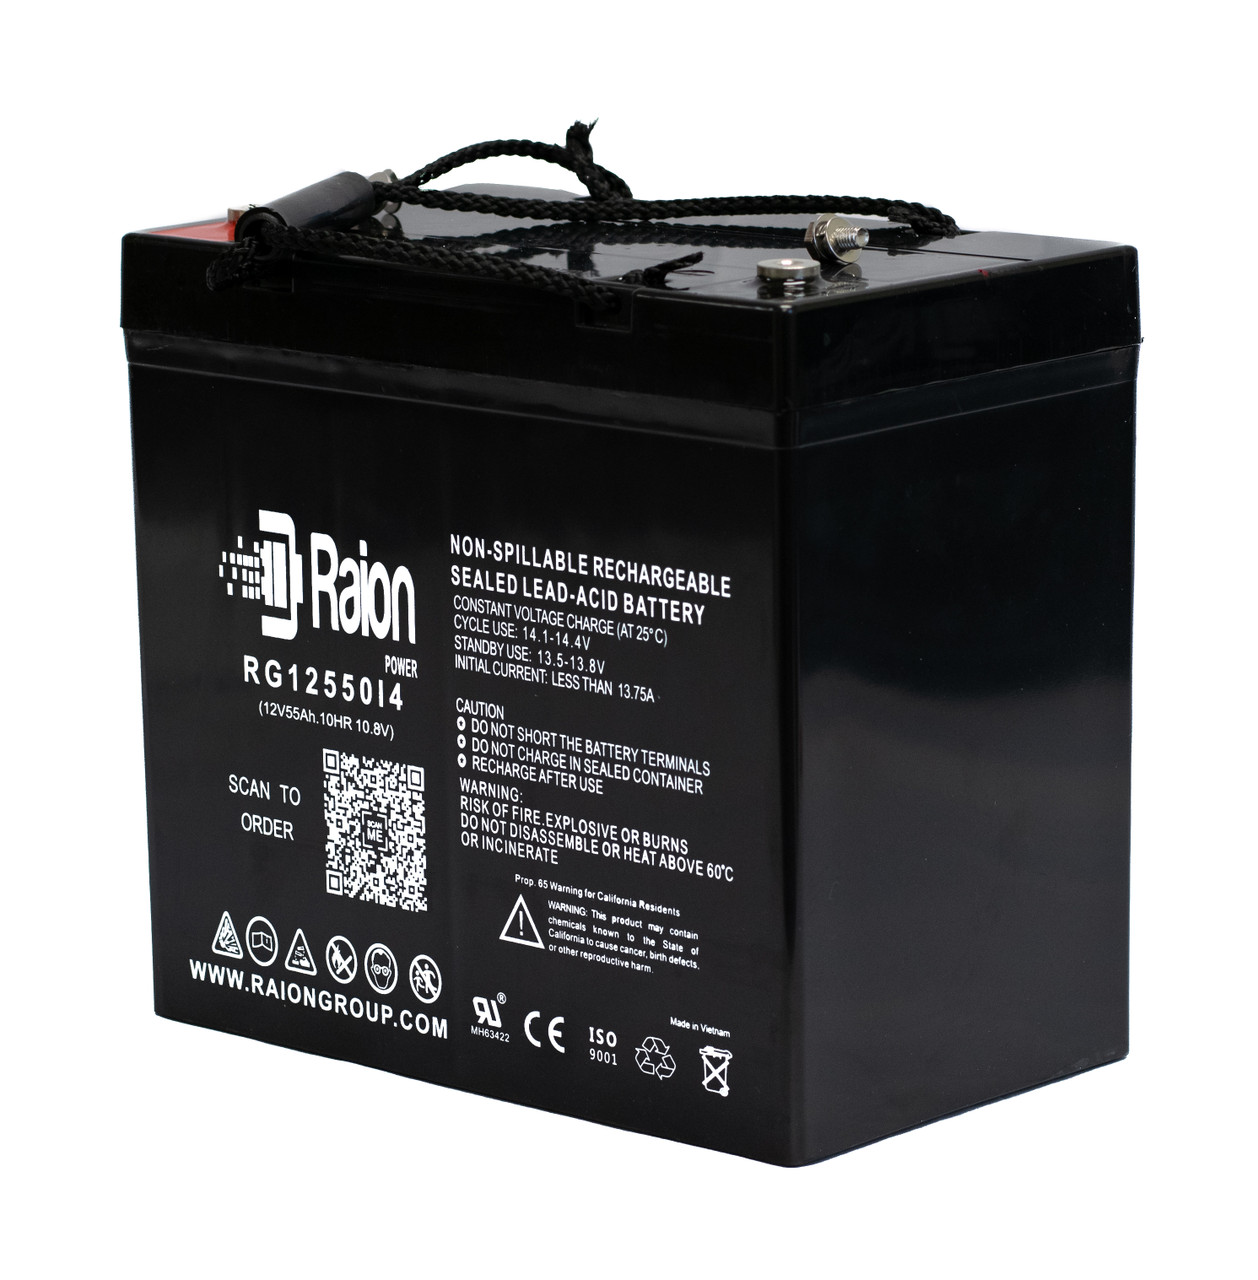 Raion Power 12V 55Ah 22NF Mobility Scooter Battery Replacement for Optiway Technology Centurion